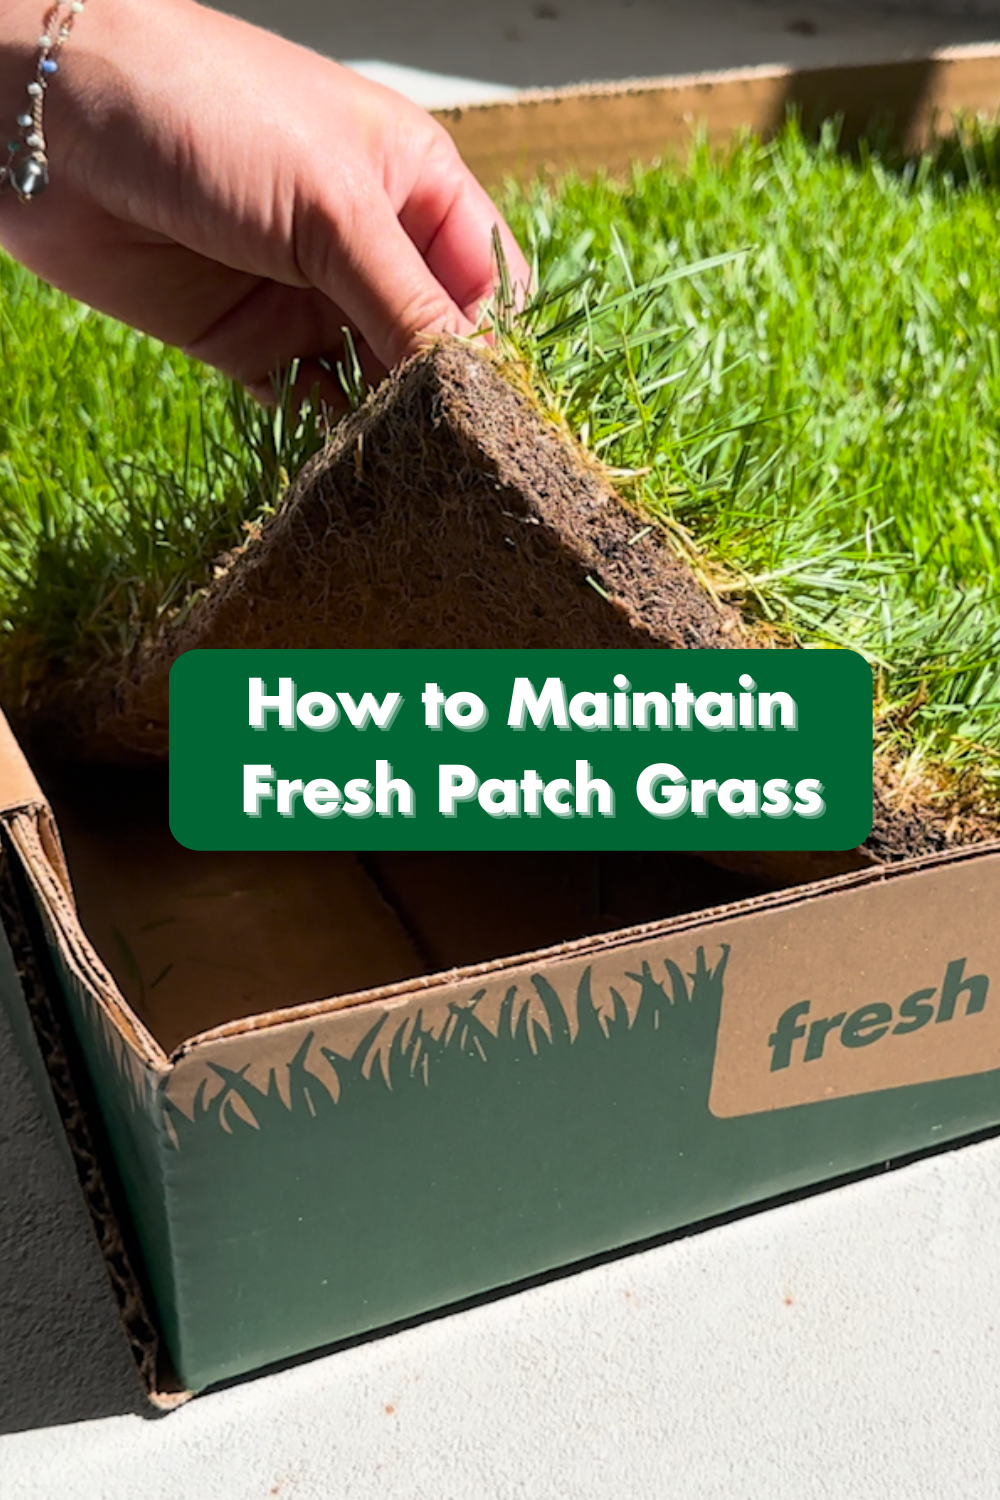 How To Maintain Fresh Patch Grass